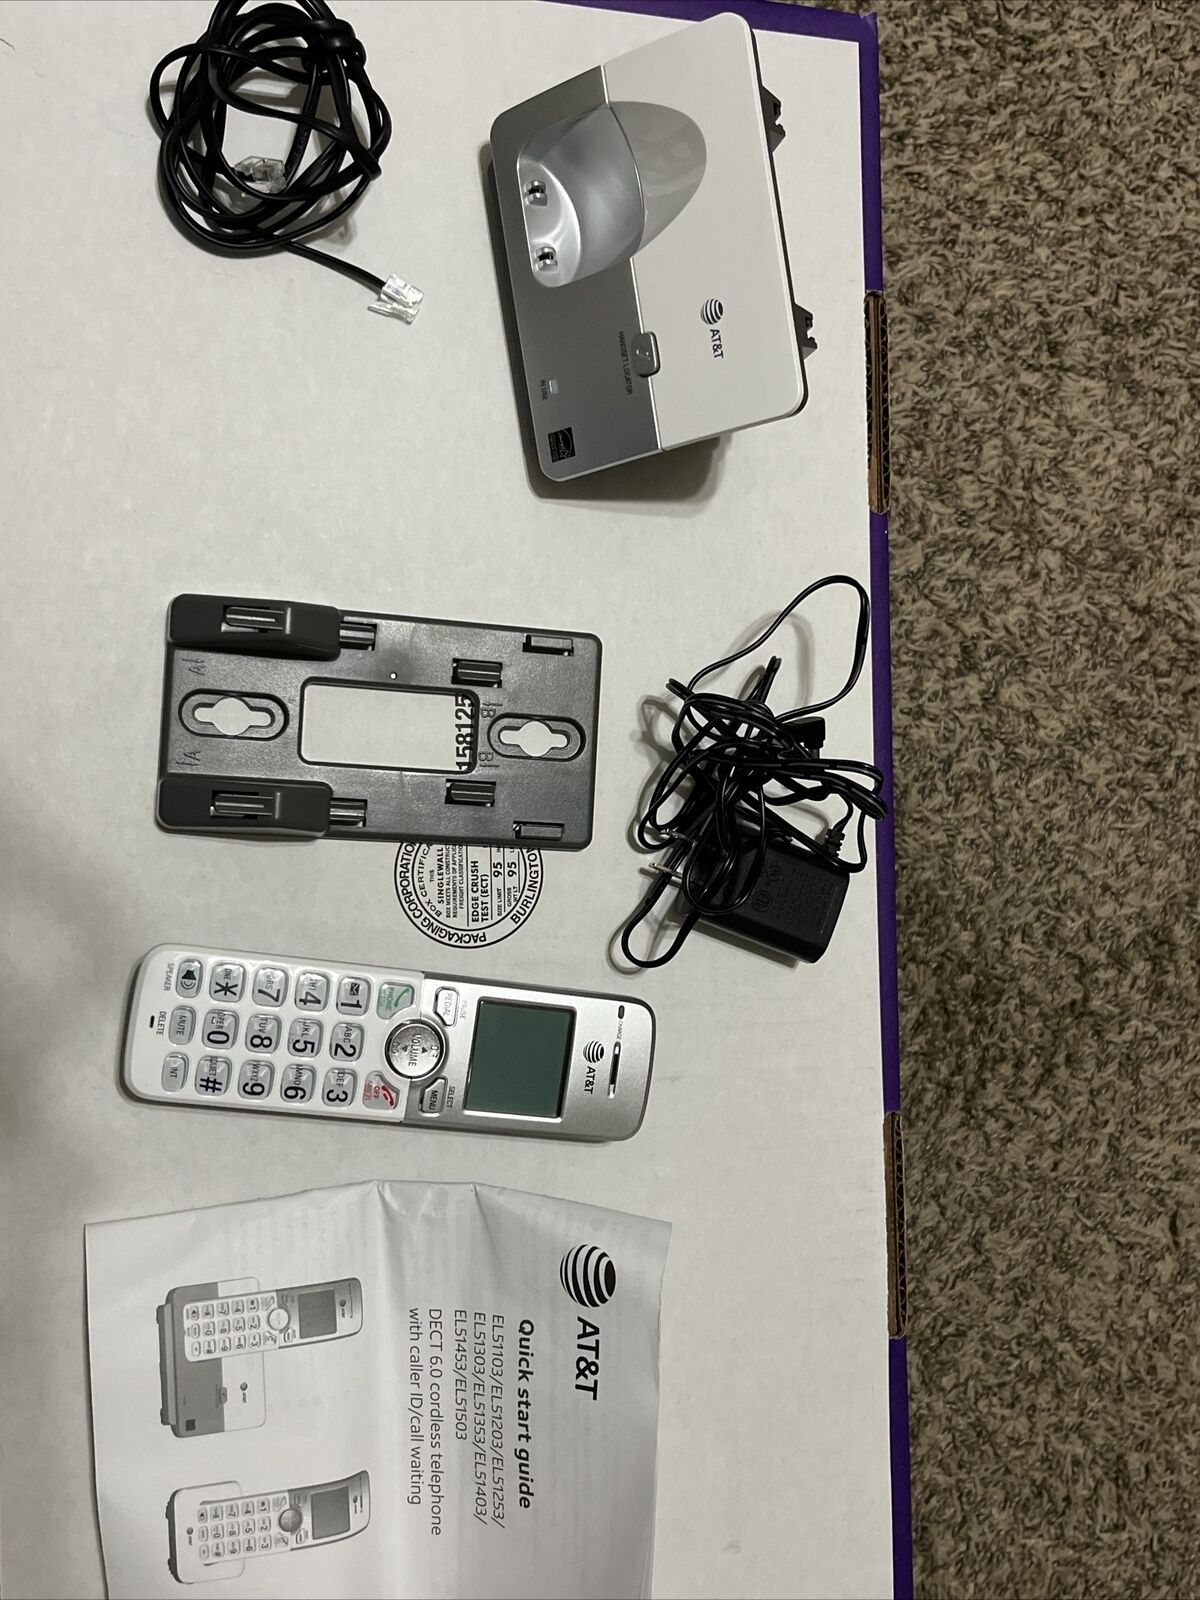 AT&T EL51103 DECT 6.0 Cordless Phone System with Caller ID - Silver